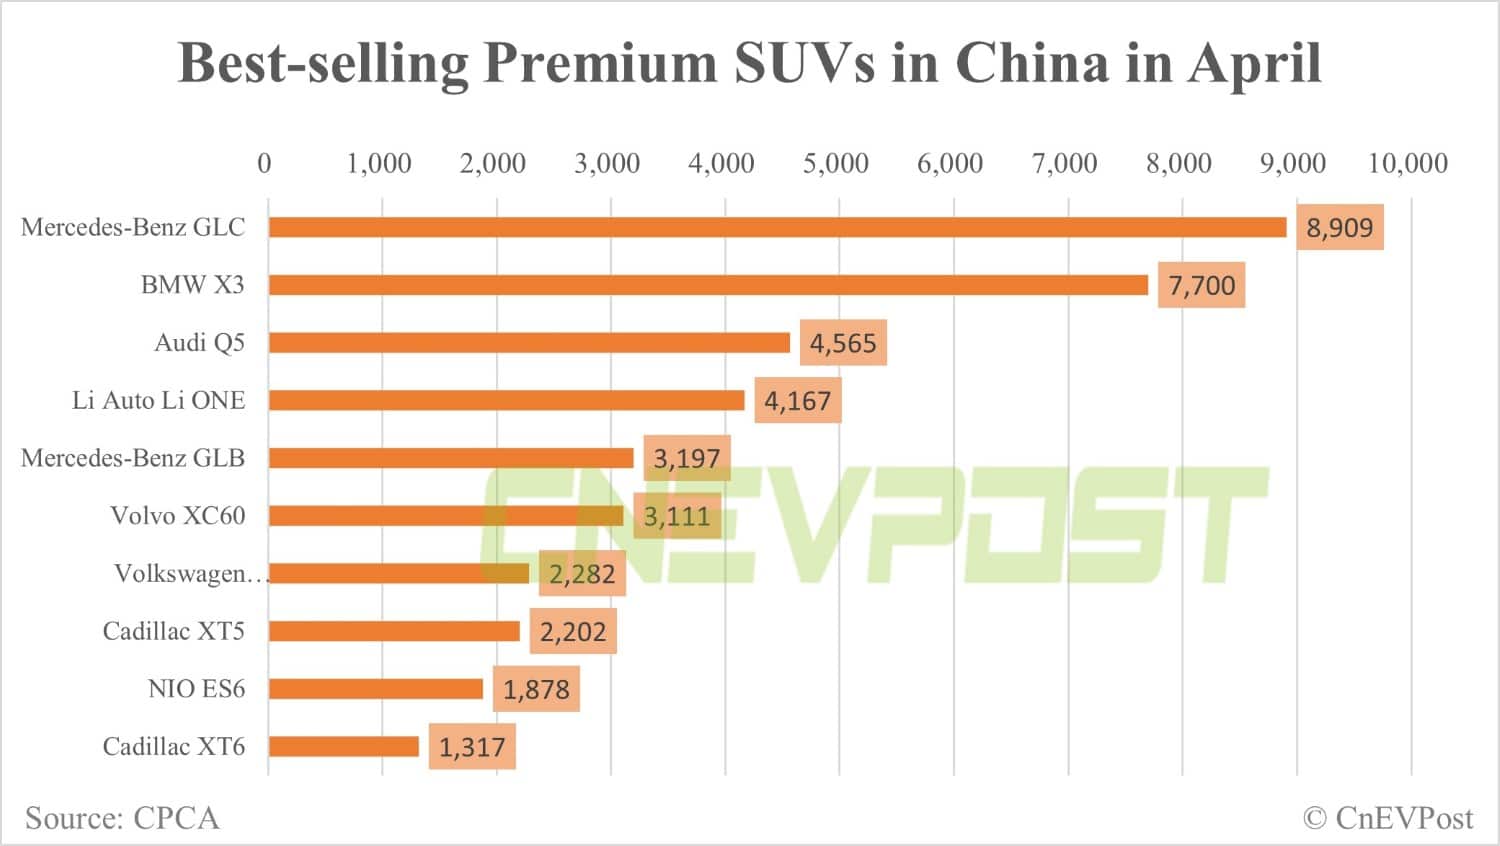 Tesla Model Y remains best-selling premium SUV in China in Jan-April, even though sales near 0 last month-CnEVPost